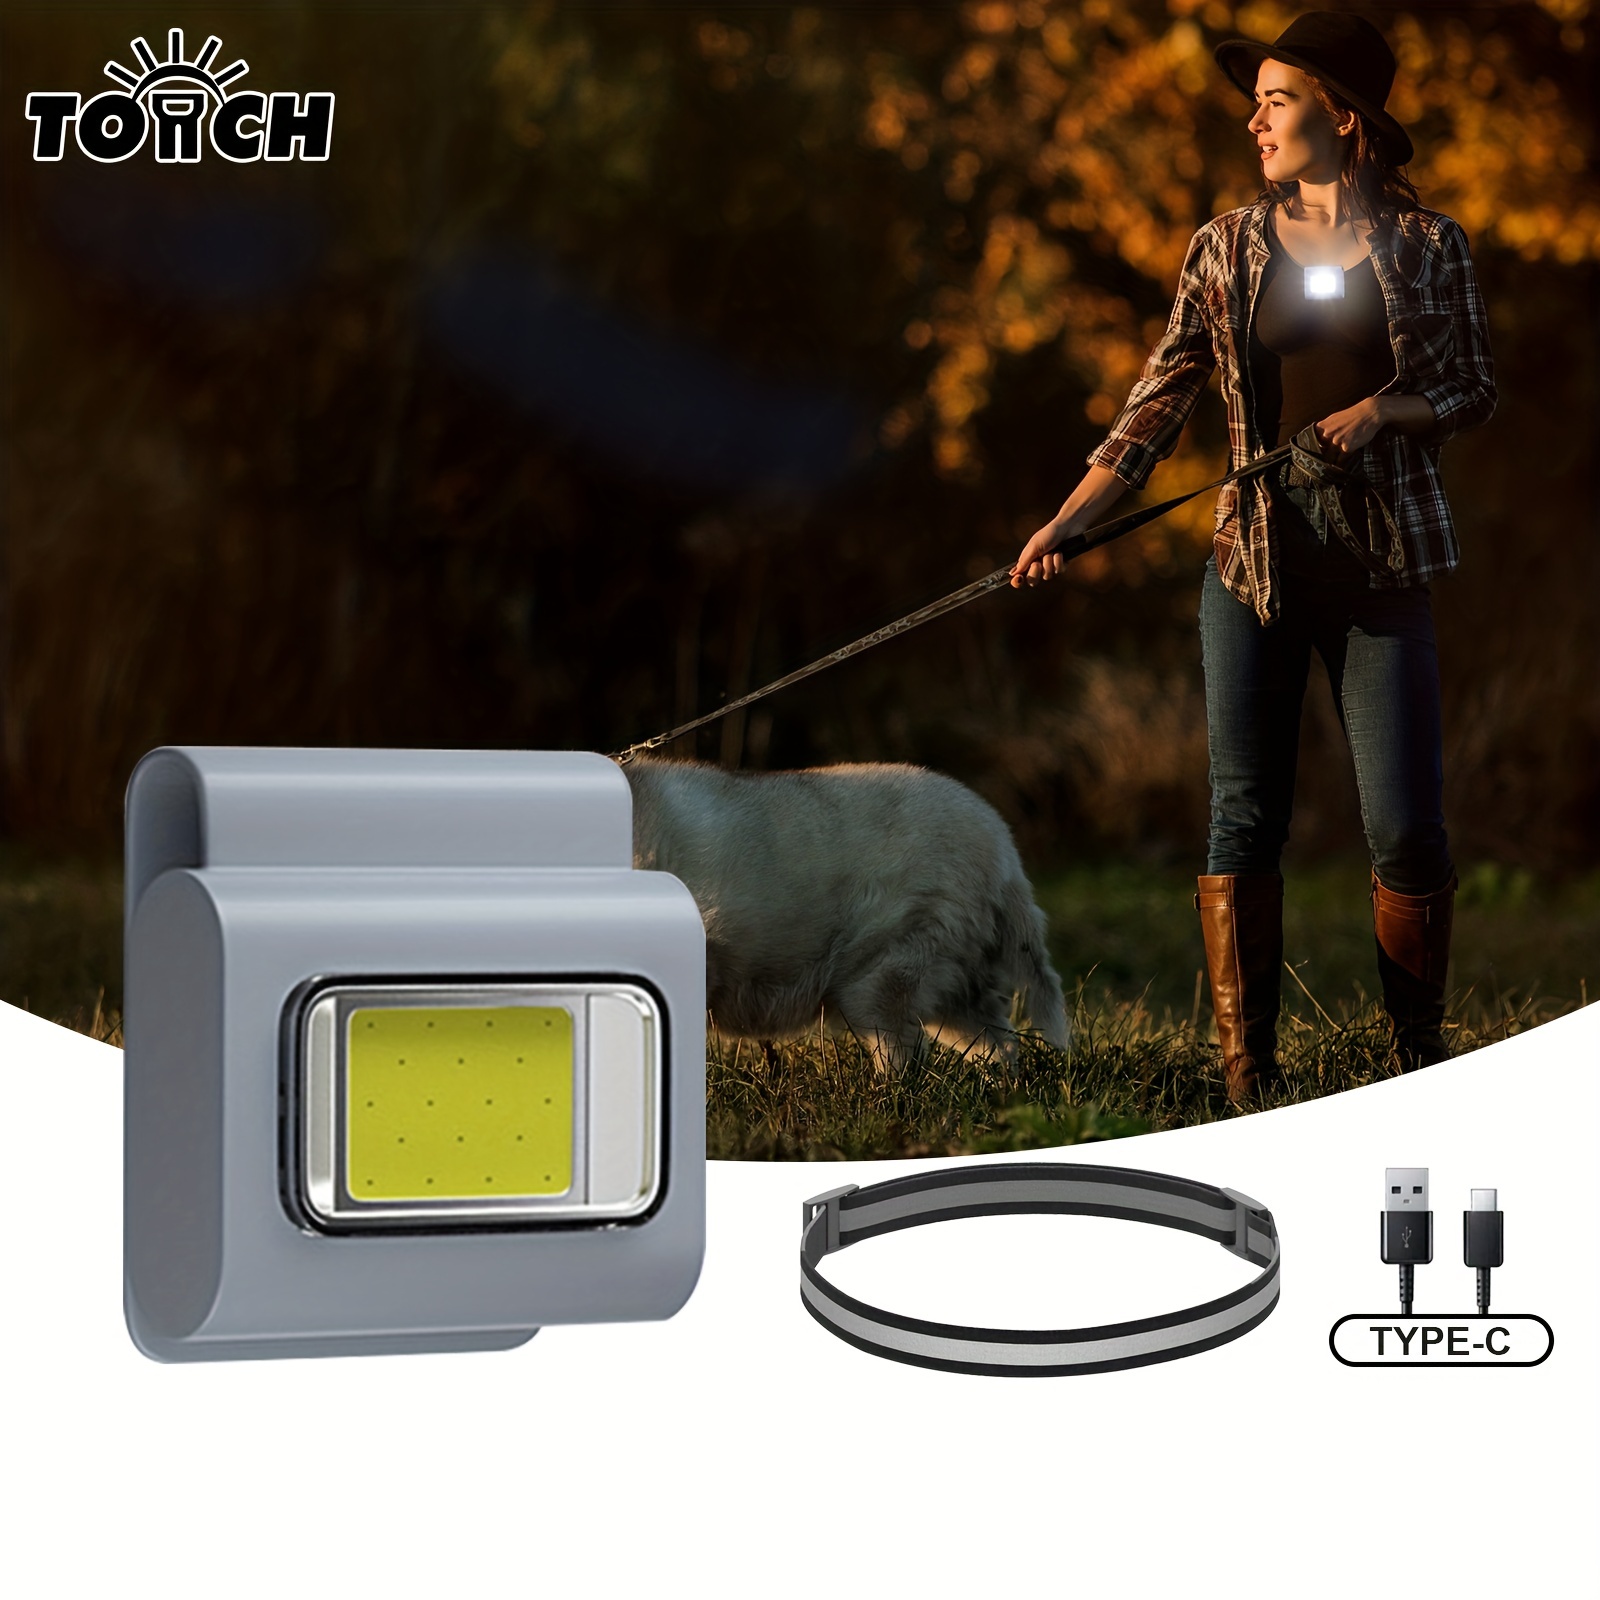 Outdoor Night Clip on Running Lights Reflective USB Rechargeable